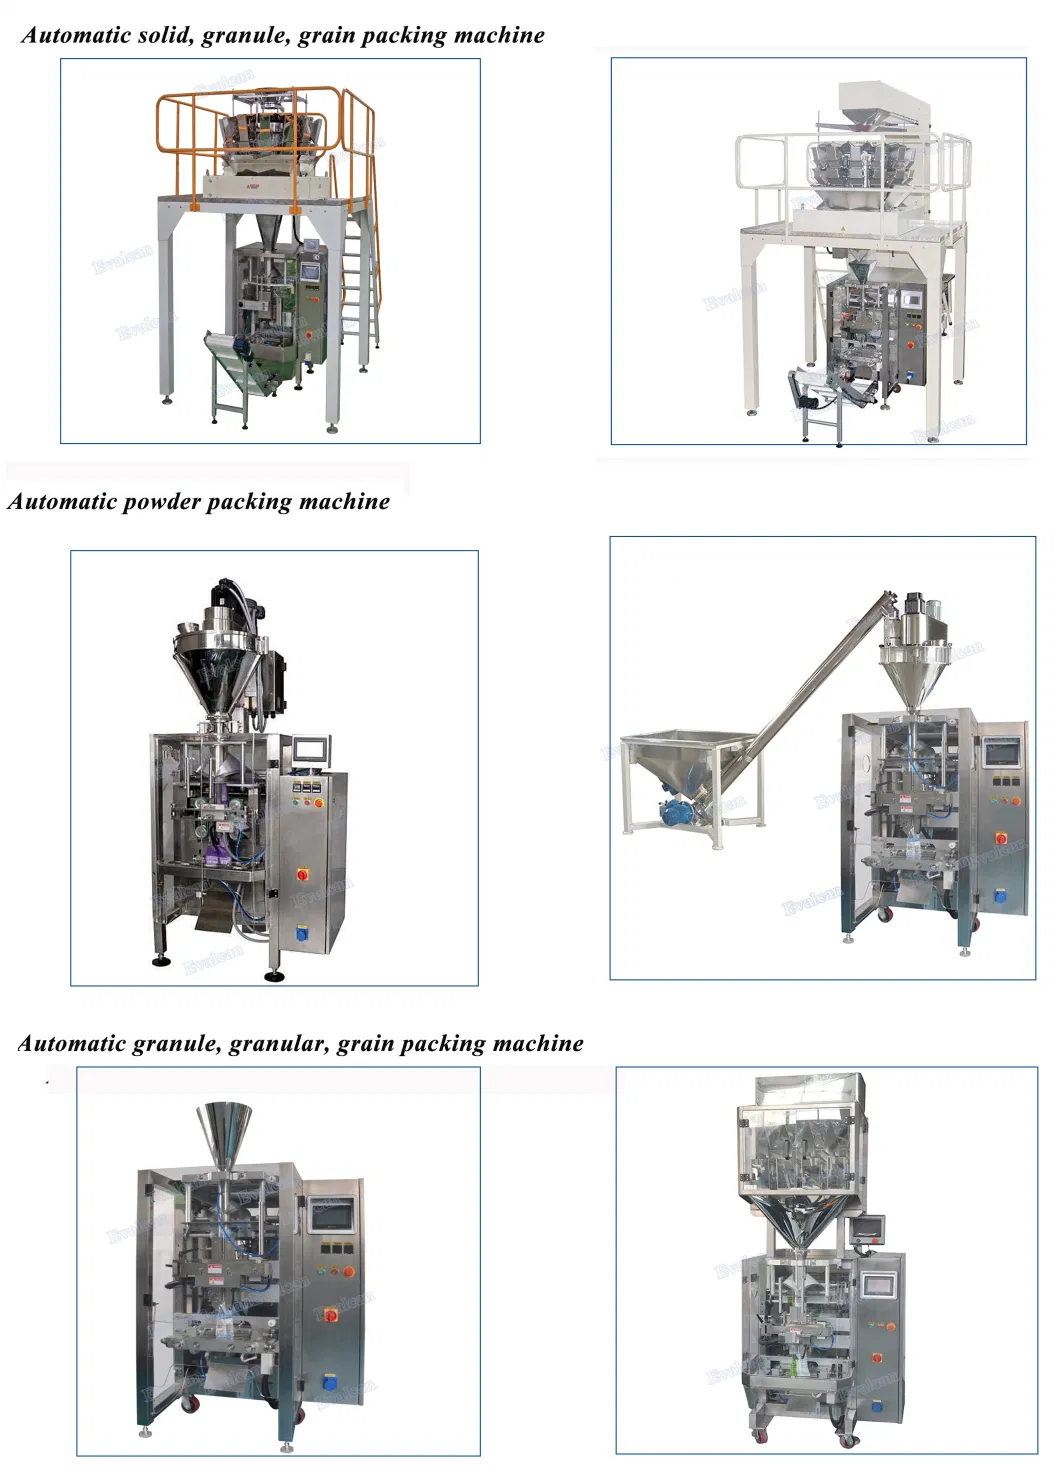 Automatic Package Food/Chilli/Coffee/Milk/Flour/Curry/Cocoa/Whey/Corngrain/Seasoning/Wheat/Detergent/Spices Powder Pouch Packing Packaging Filling Machine